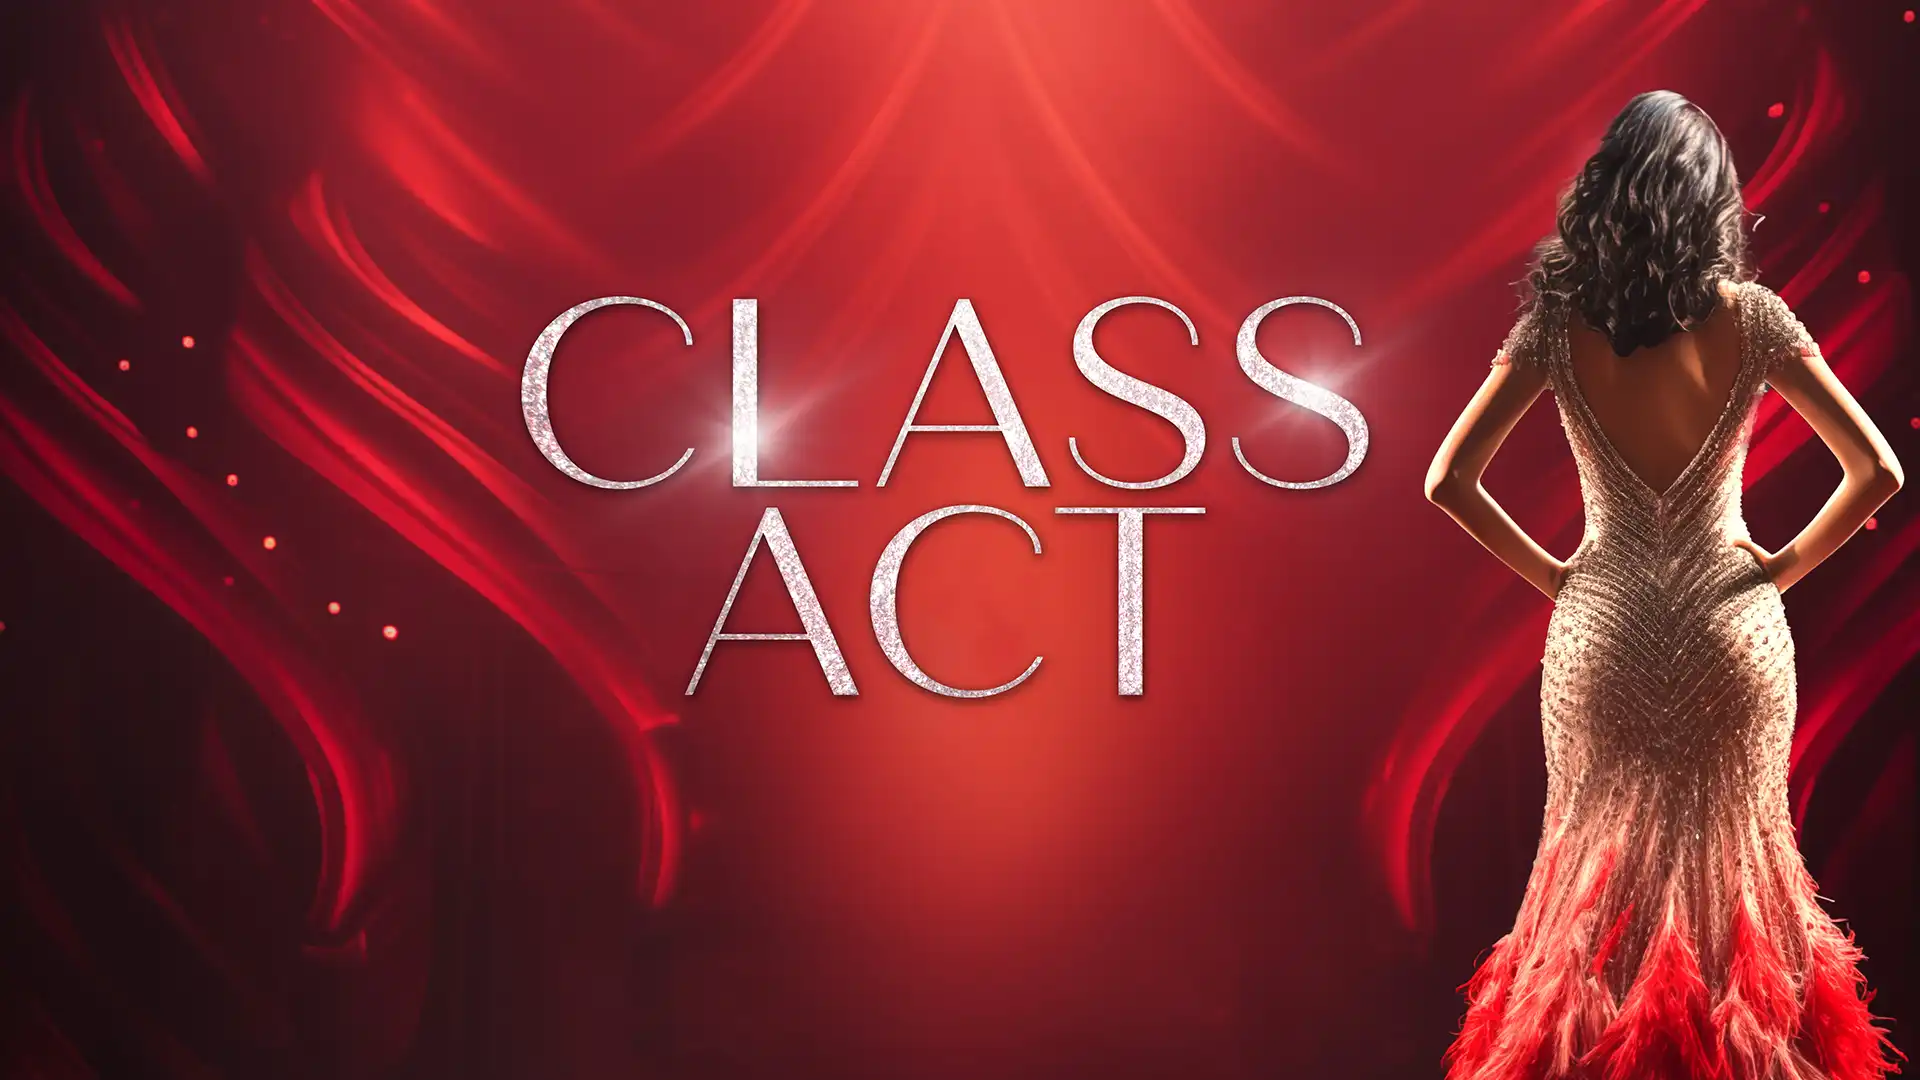 Art with "Class Act" in white sparkling font and person in gown facing toward red backdrop.